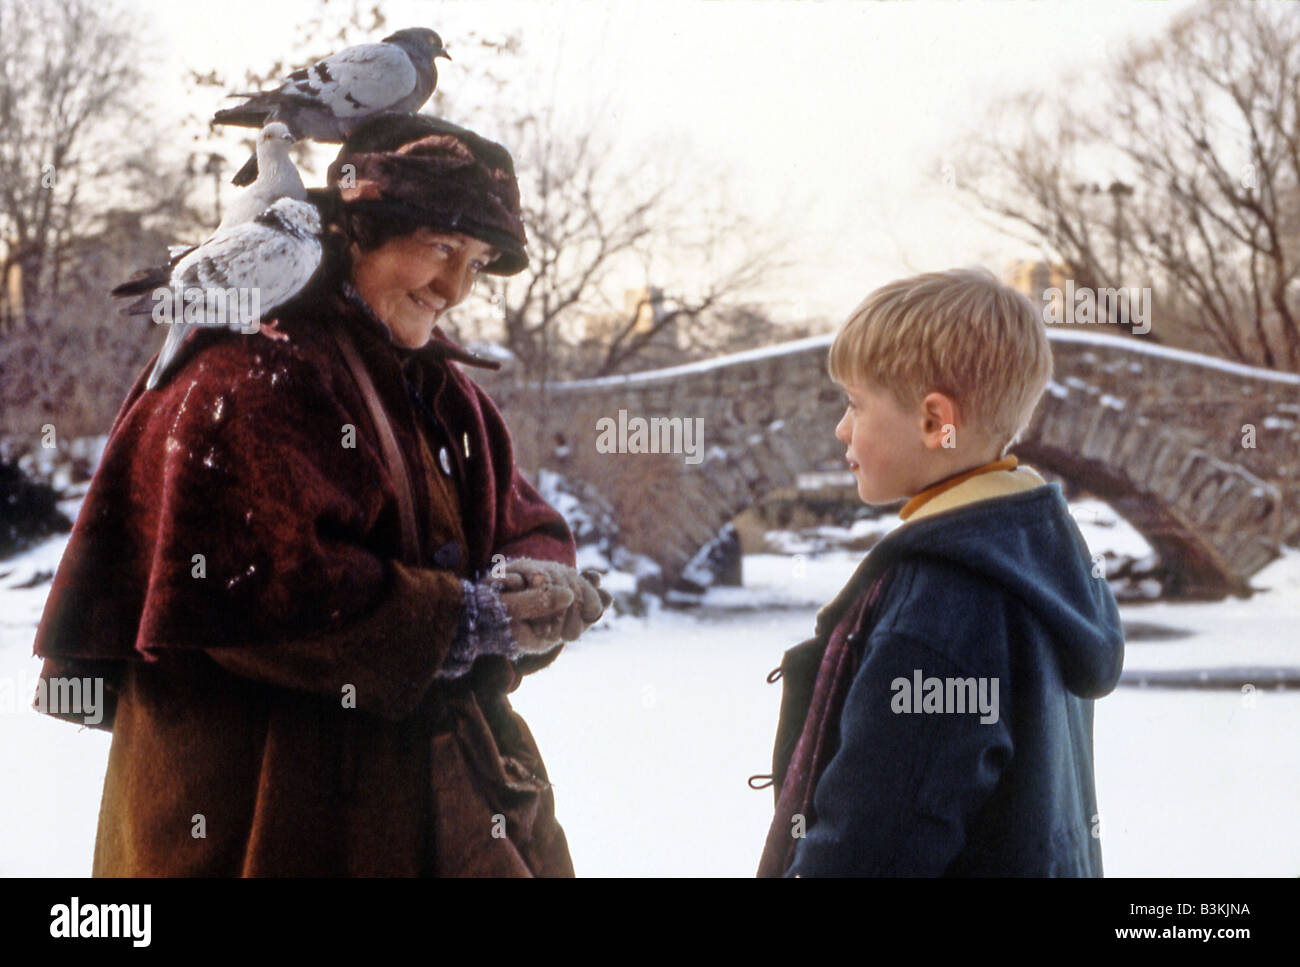 home alone 1990 download free